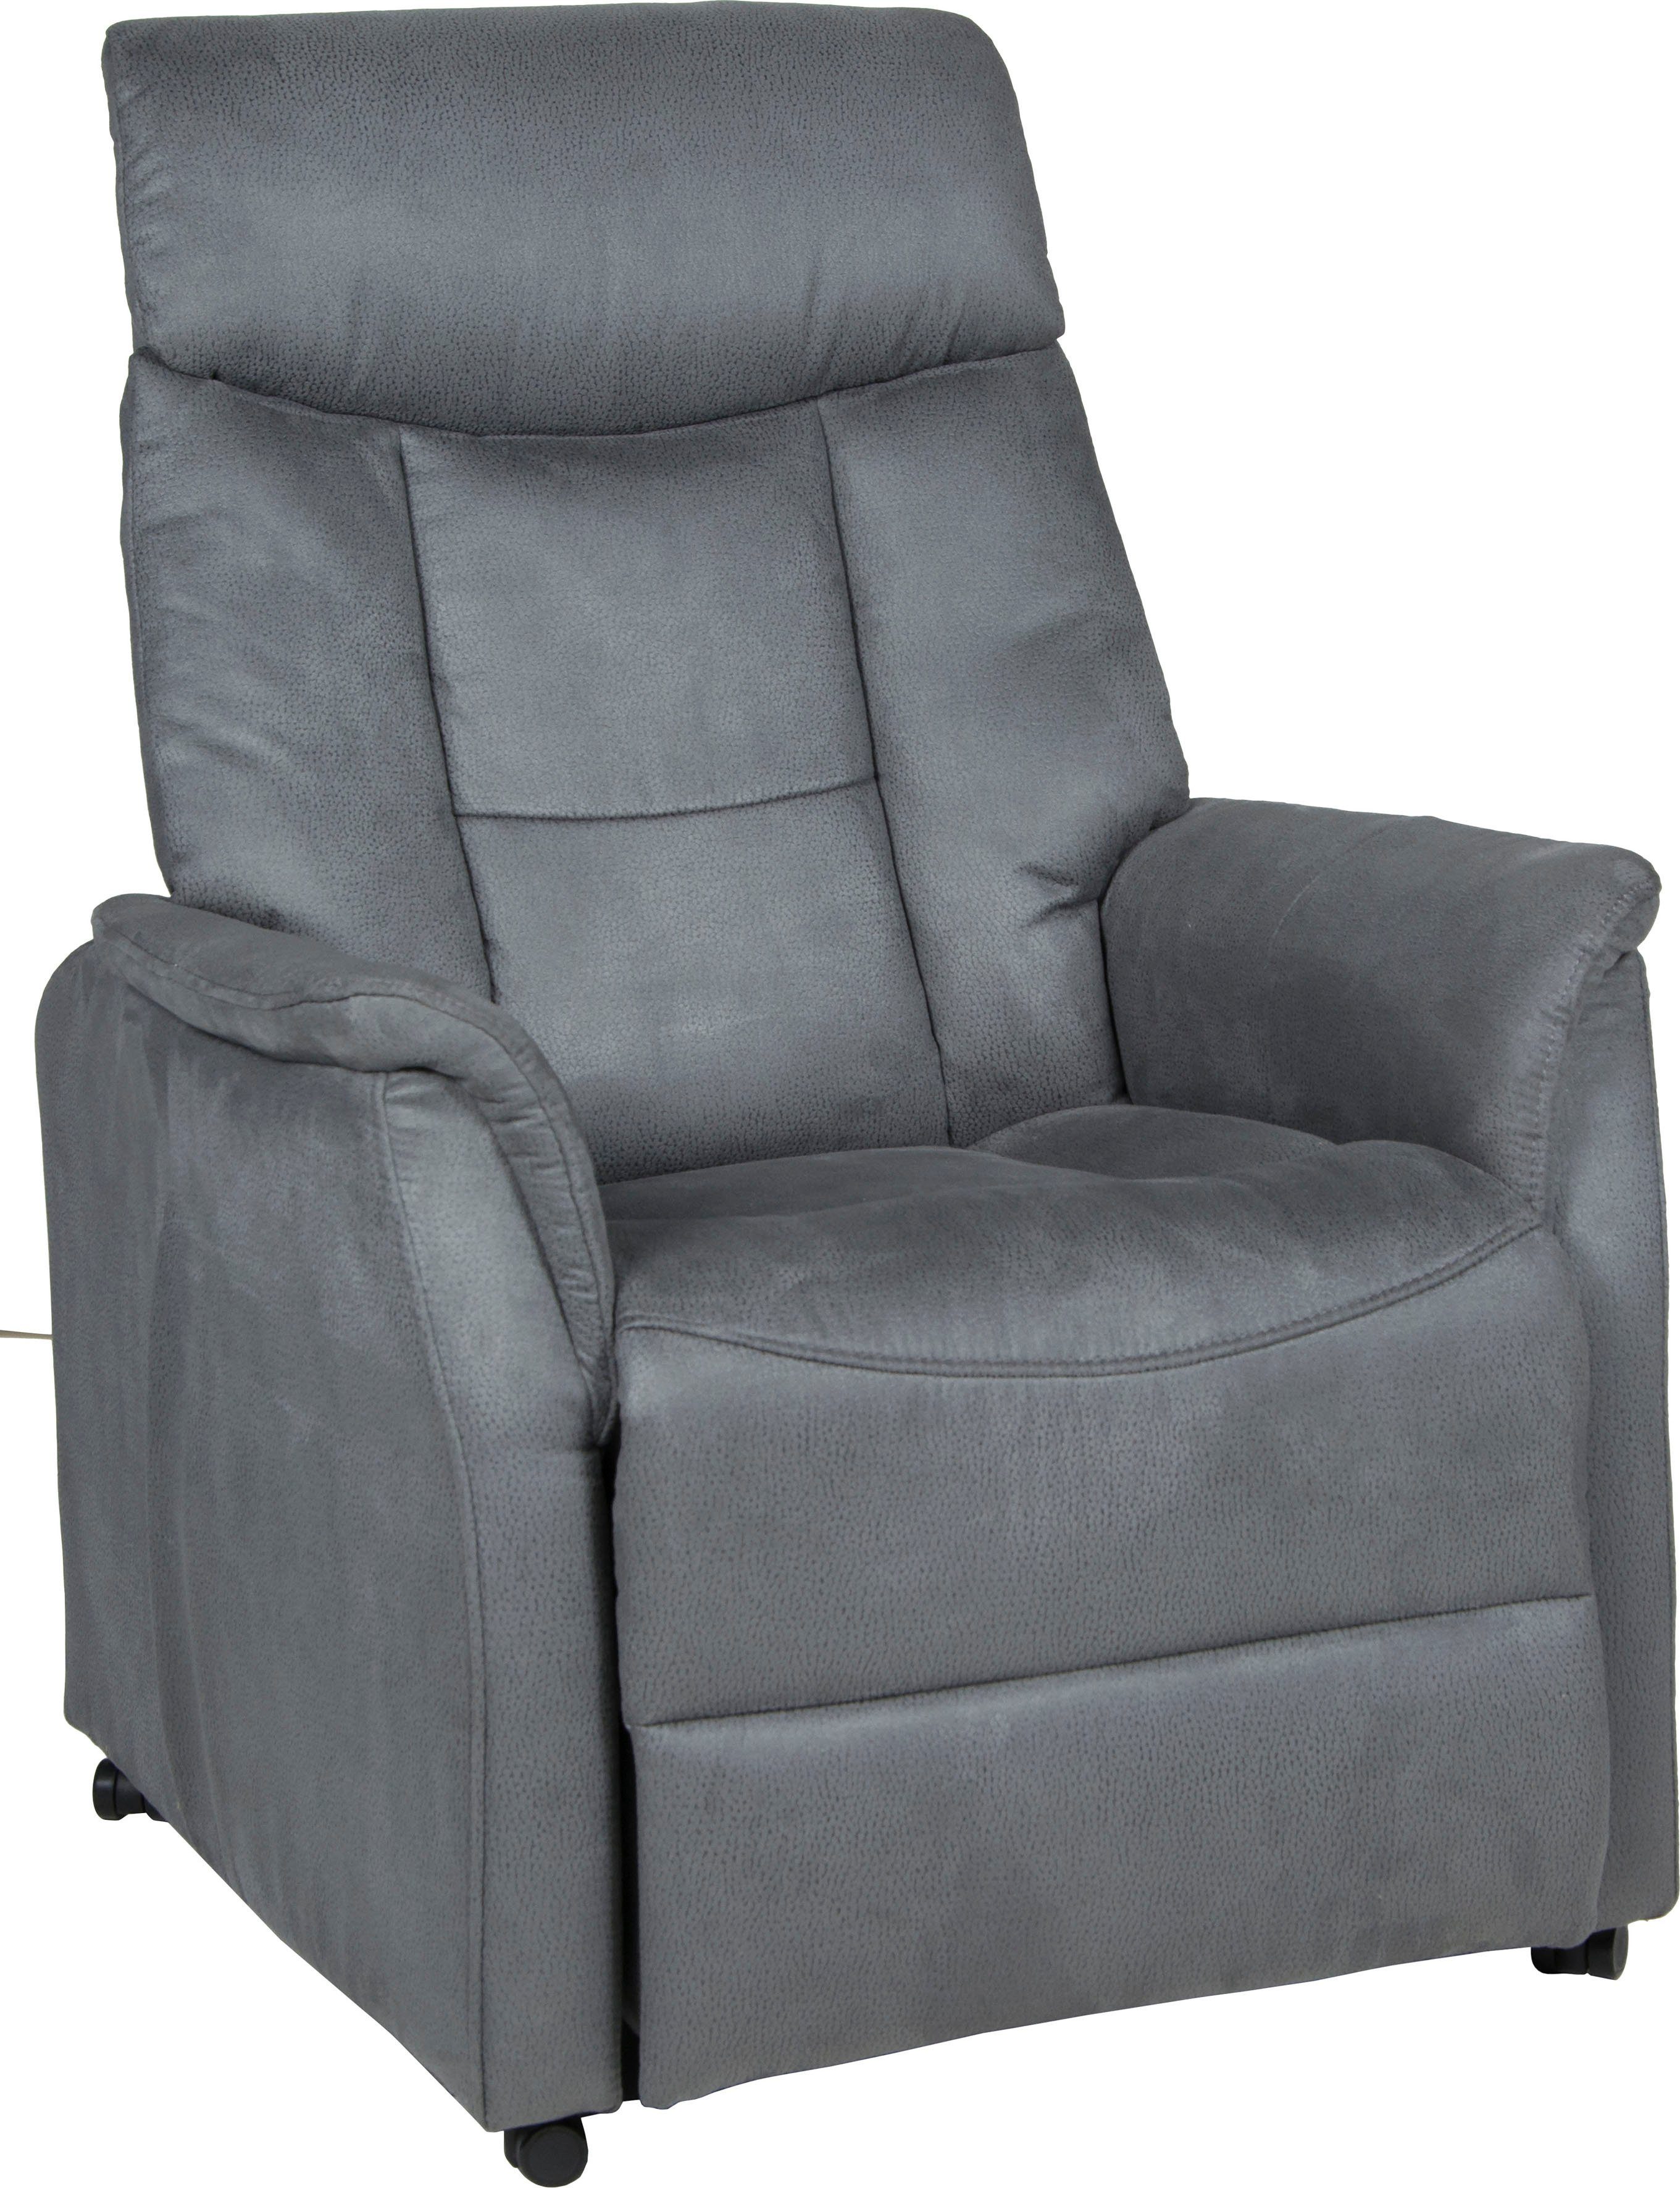 Duo Collection Relaxfauteuil Stoelverwarming inclusief timer